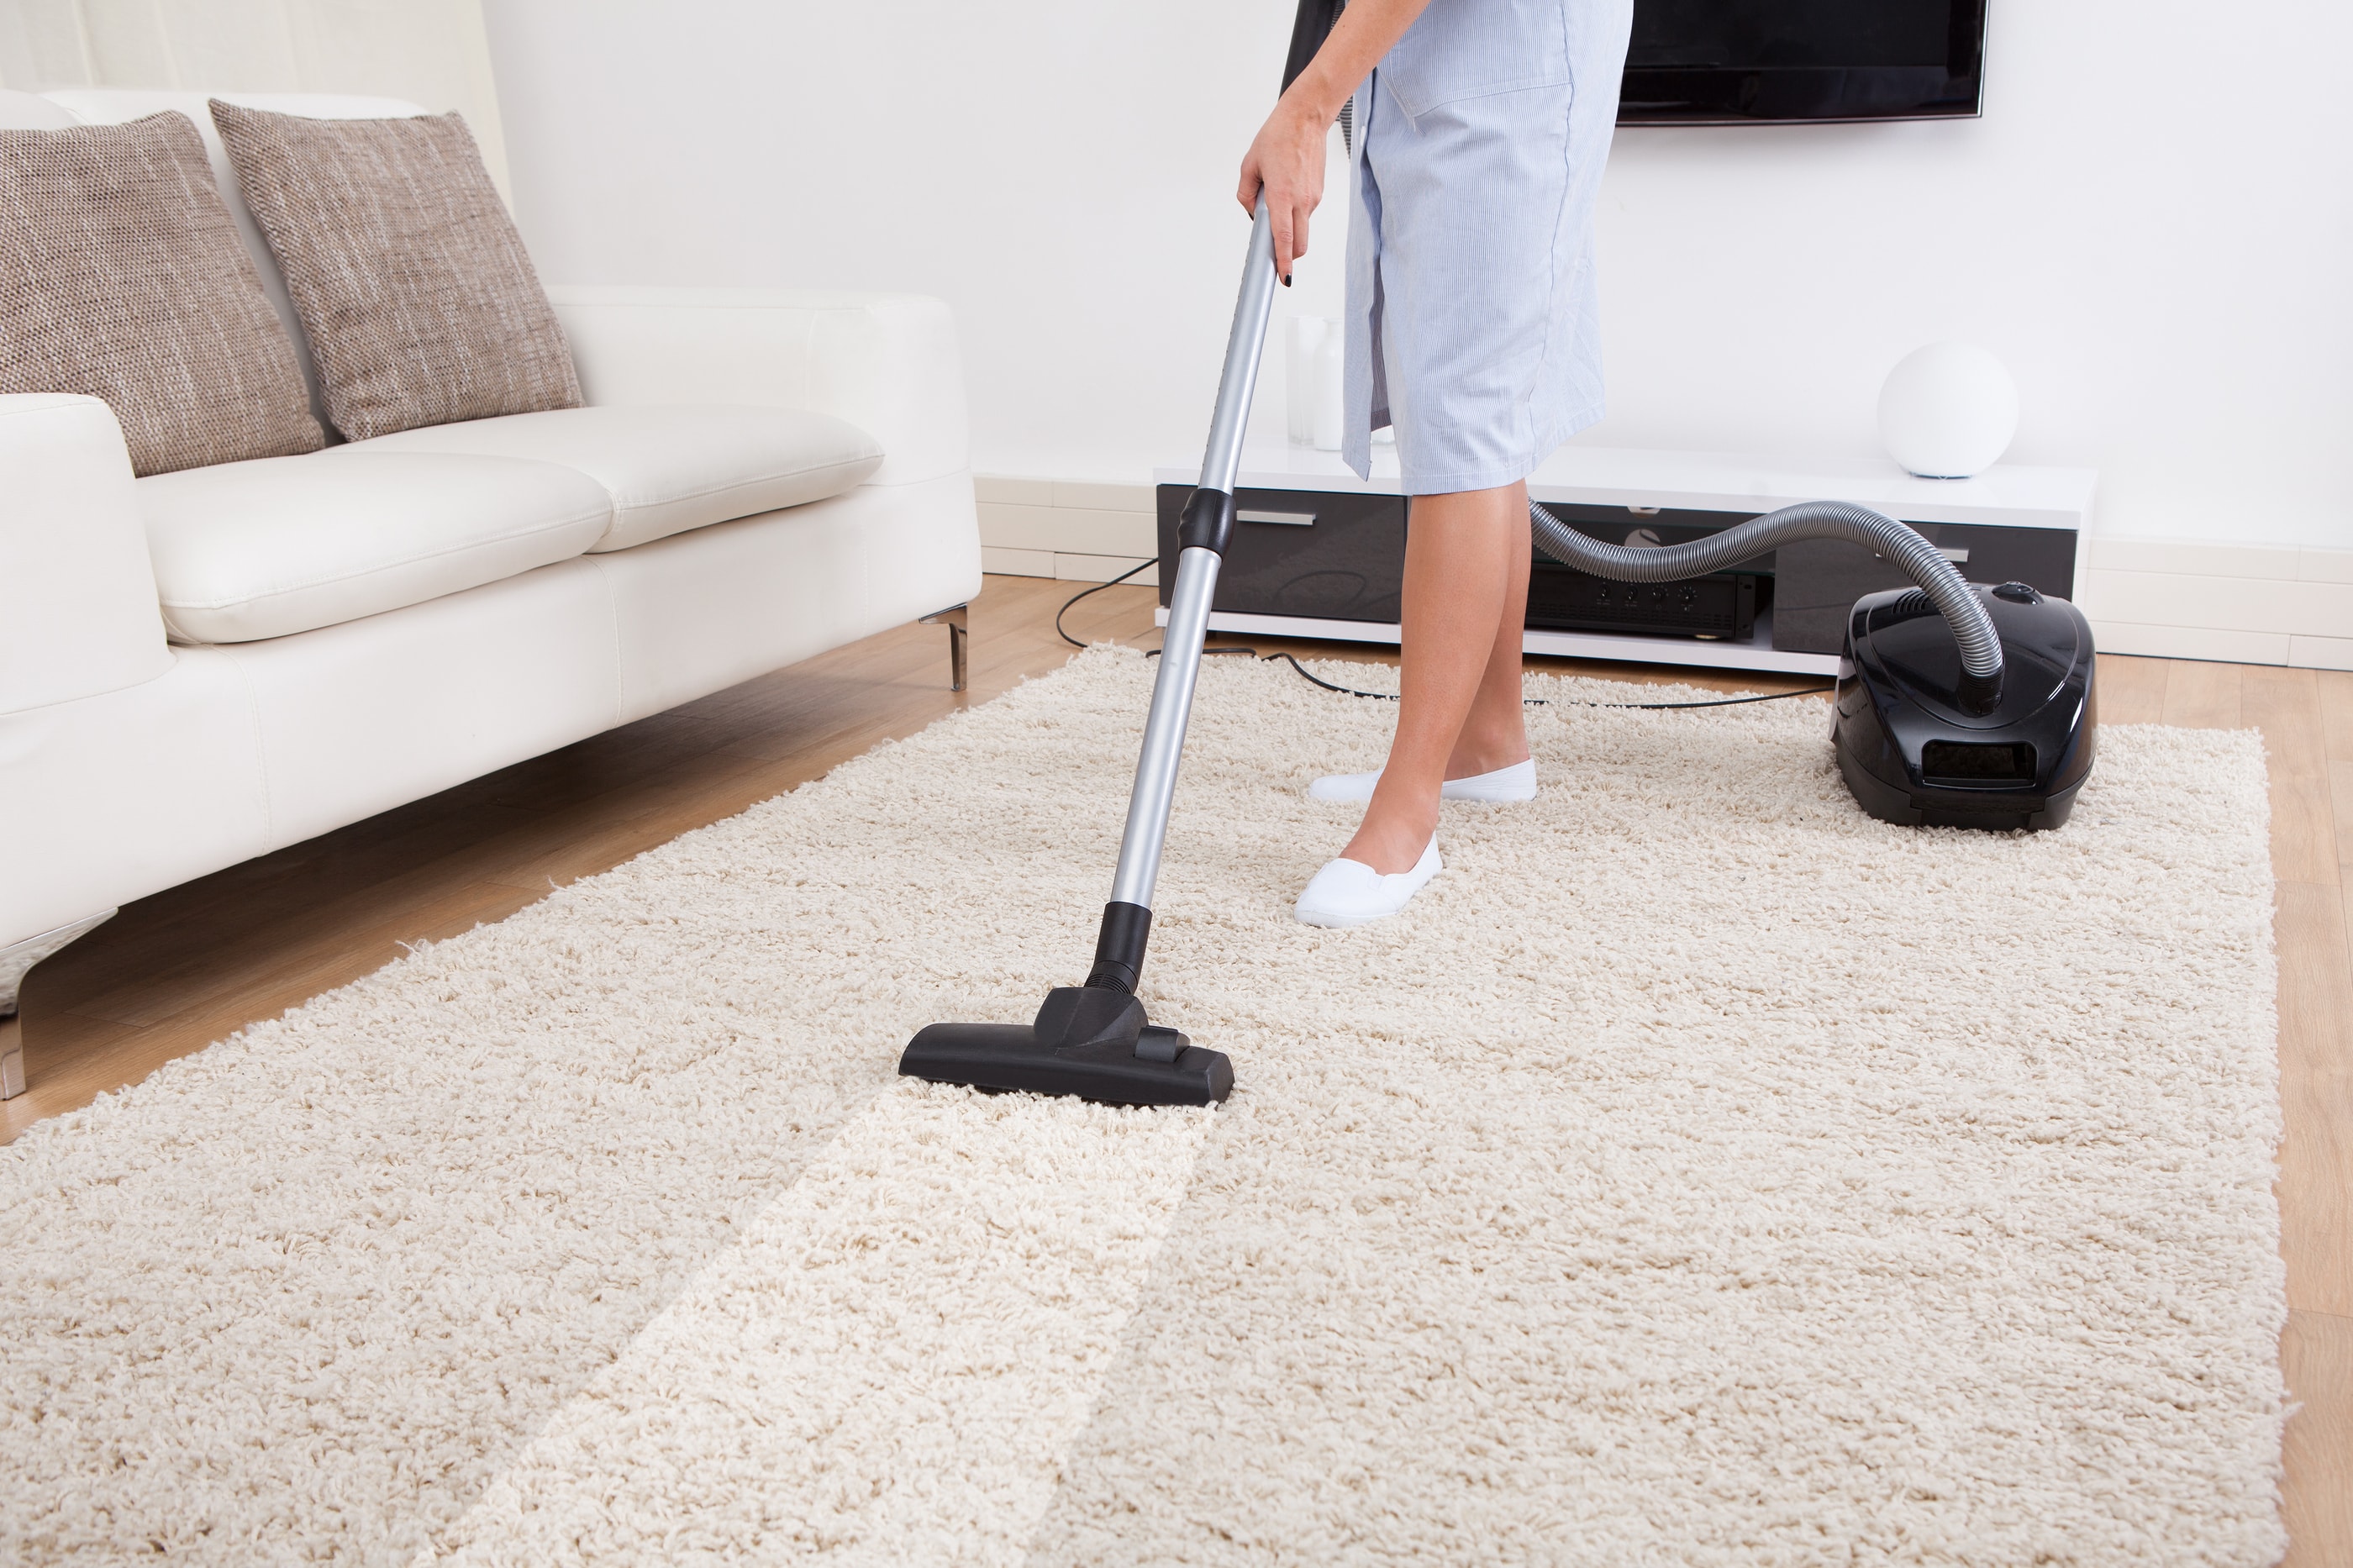 Prescott Carpet Cleaning. How To Know Carpets Need Cleaning?